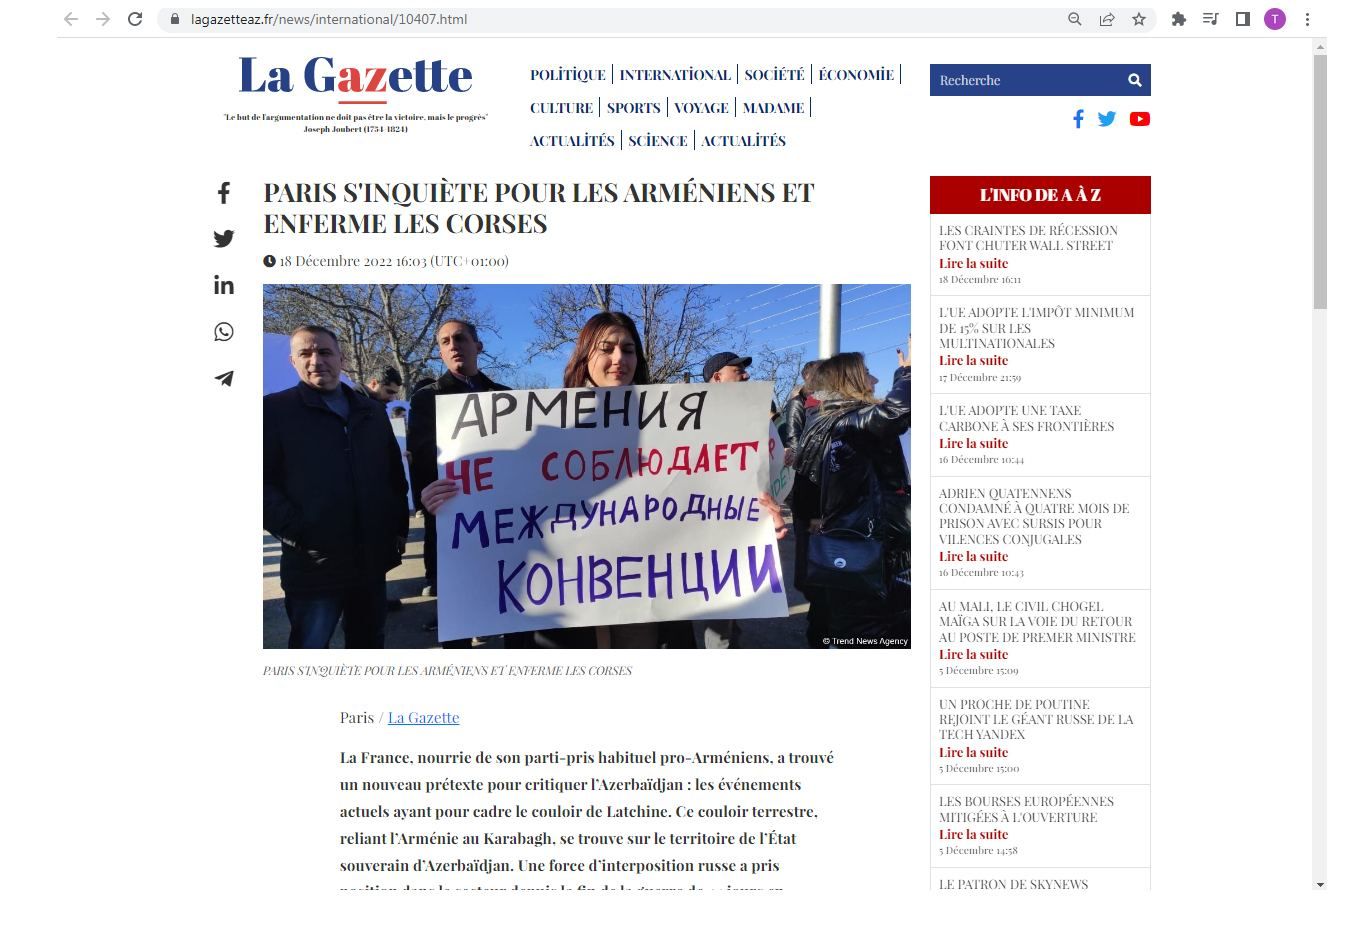 French double standards: My country supports Armenian separatism while persecuting Corsicans - French journalist